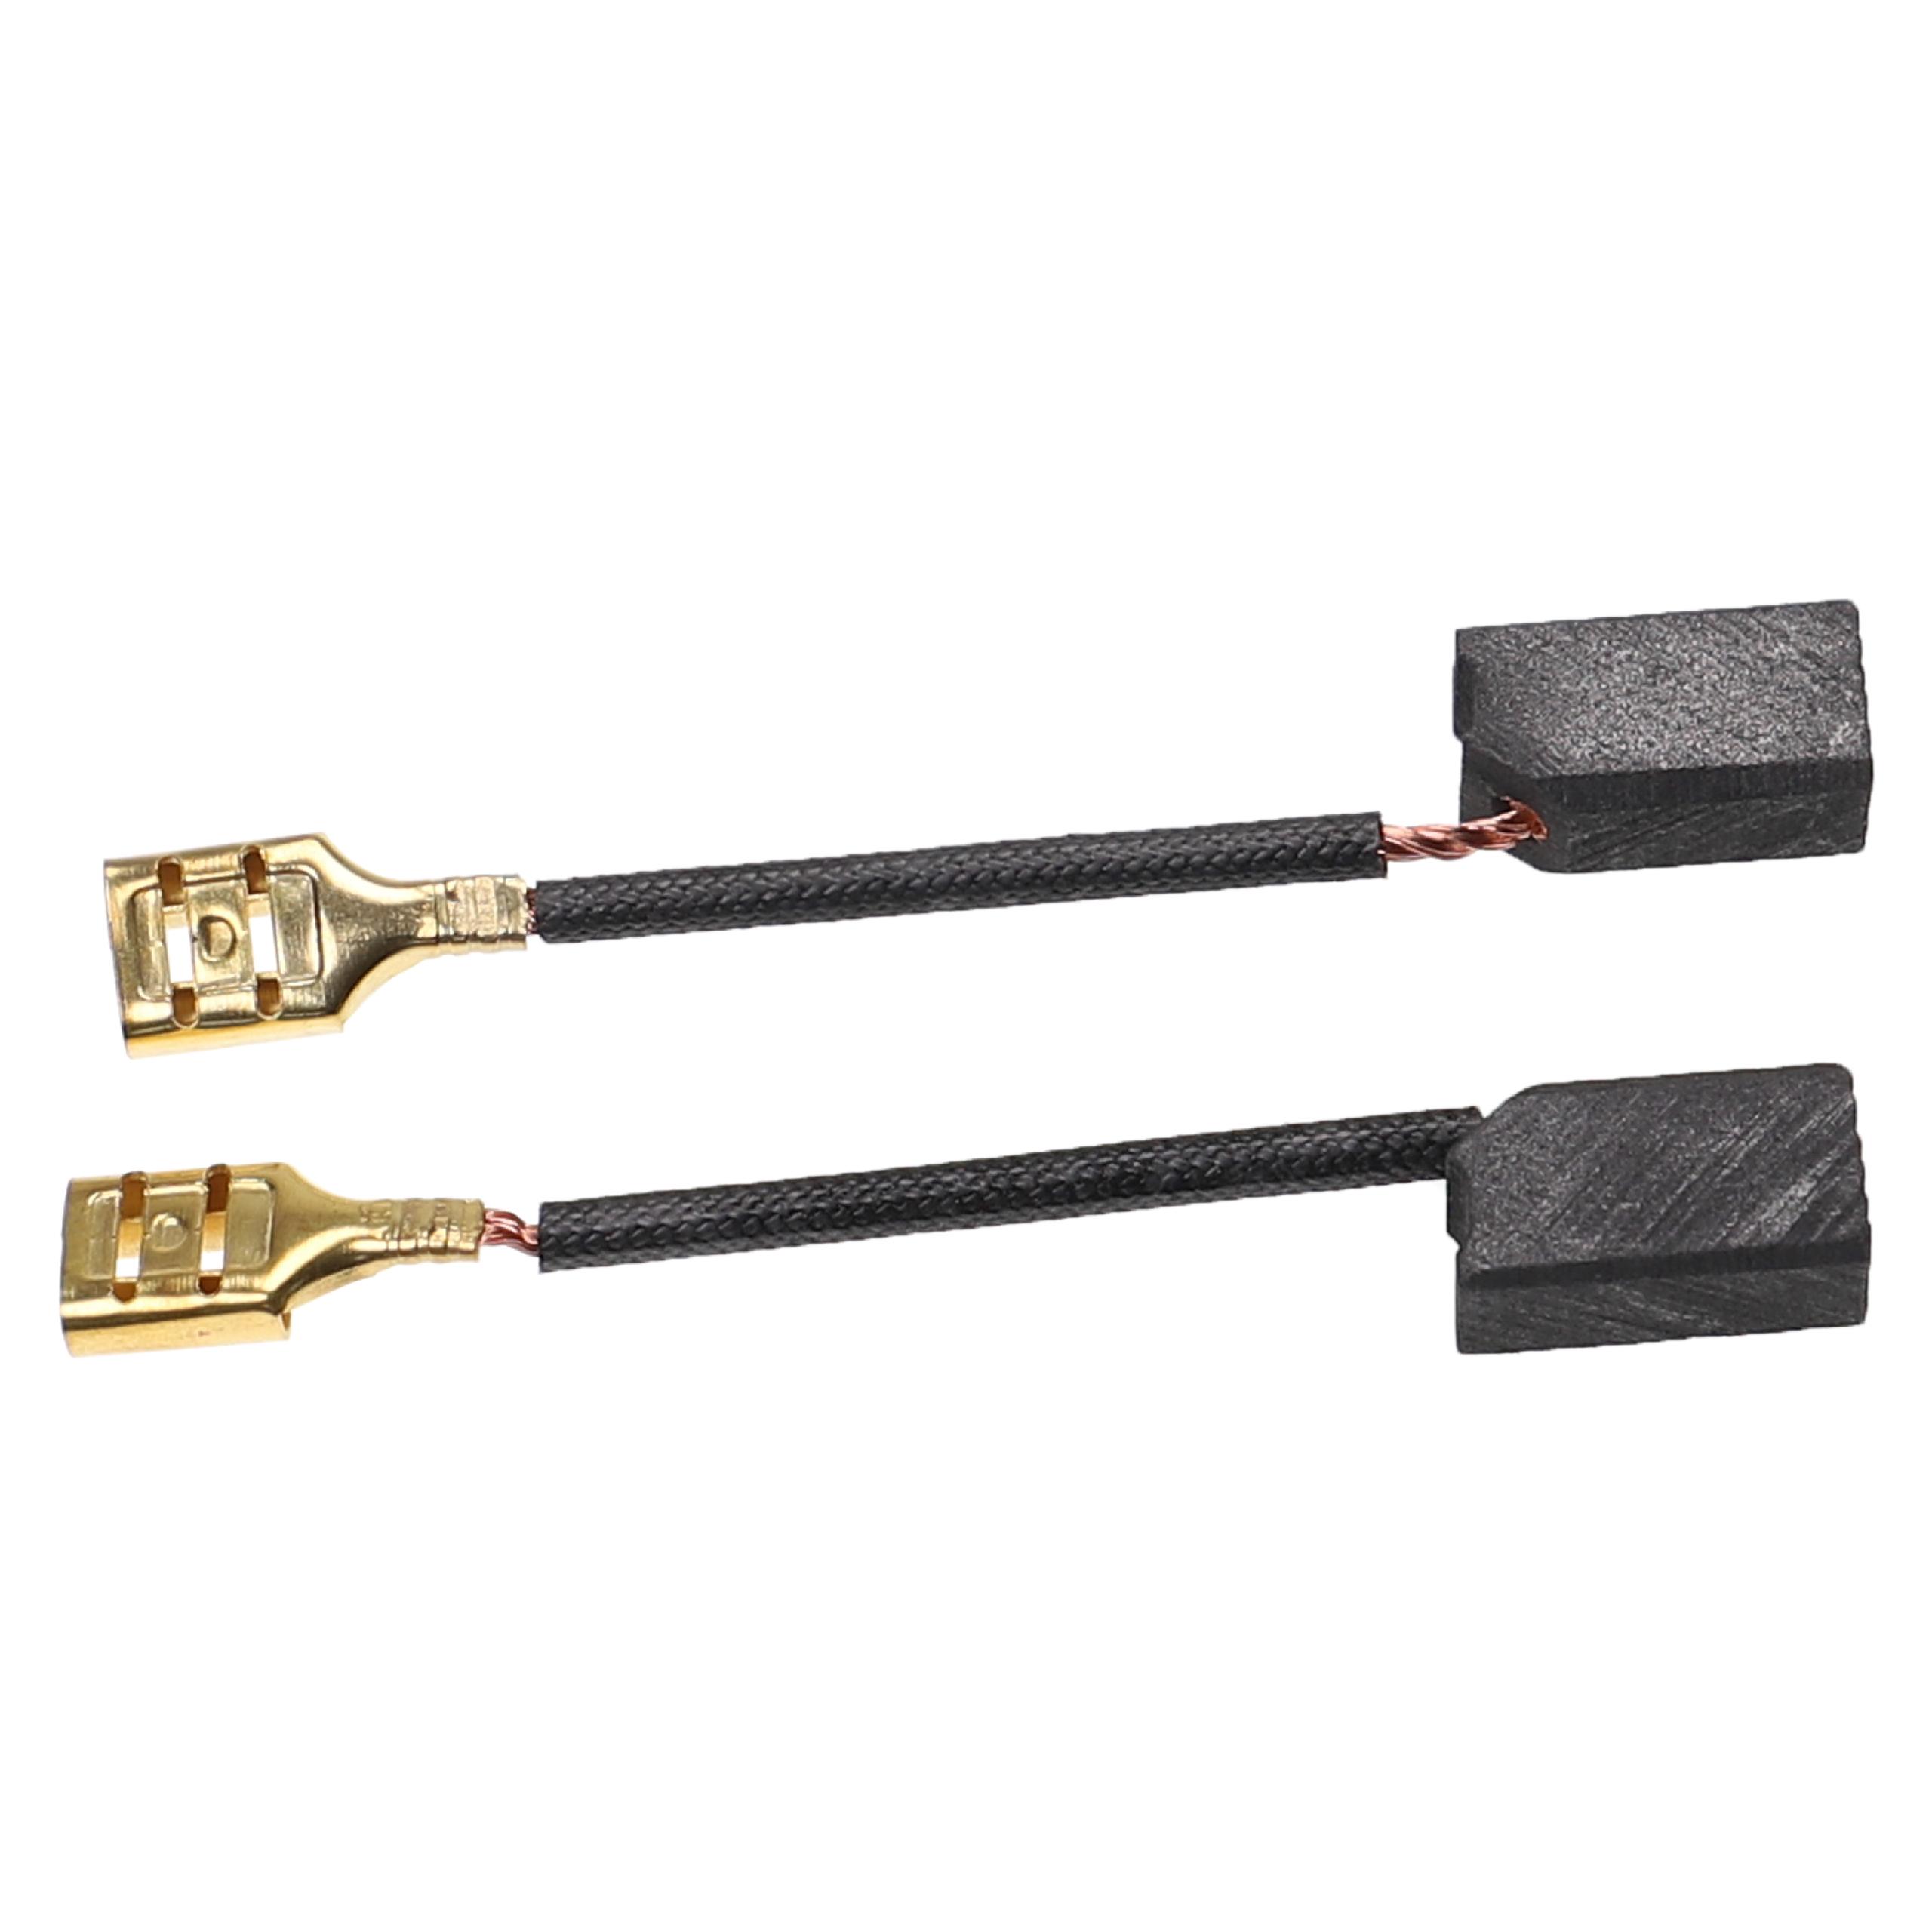 2x Carbon Brush 6 x 8 x 14 mm for power tool / angle grinder